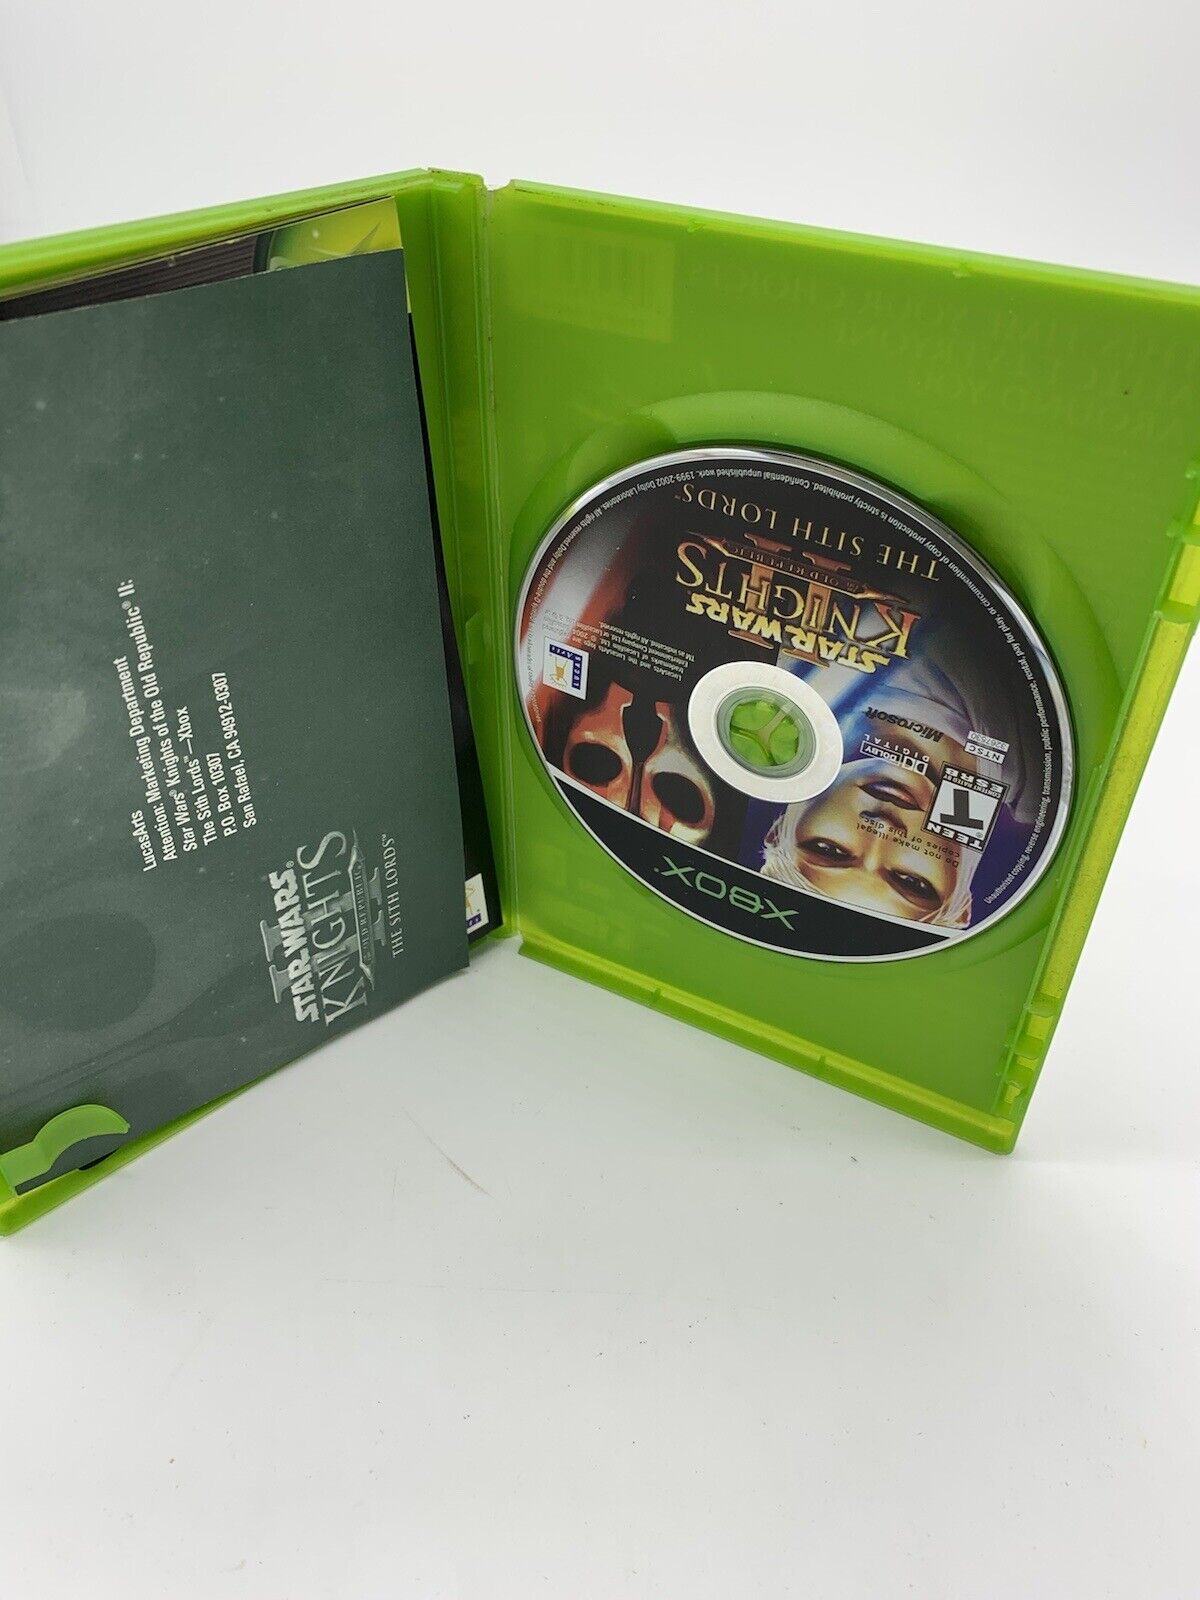 Star Wars: Knights of the Old Republic II - The Sith Lords (Xbox, 2004)